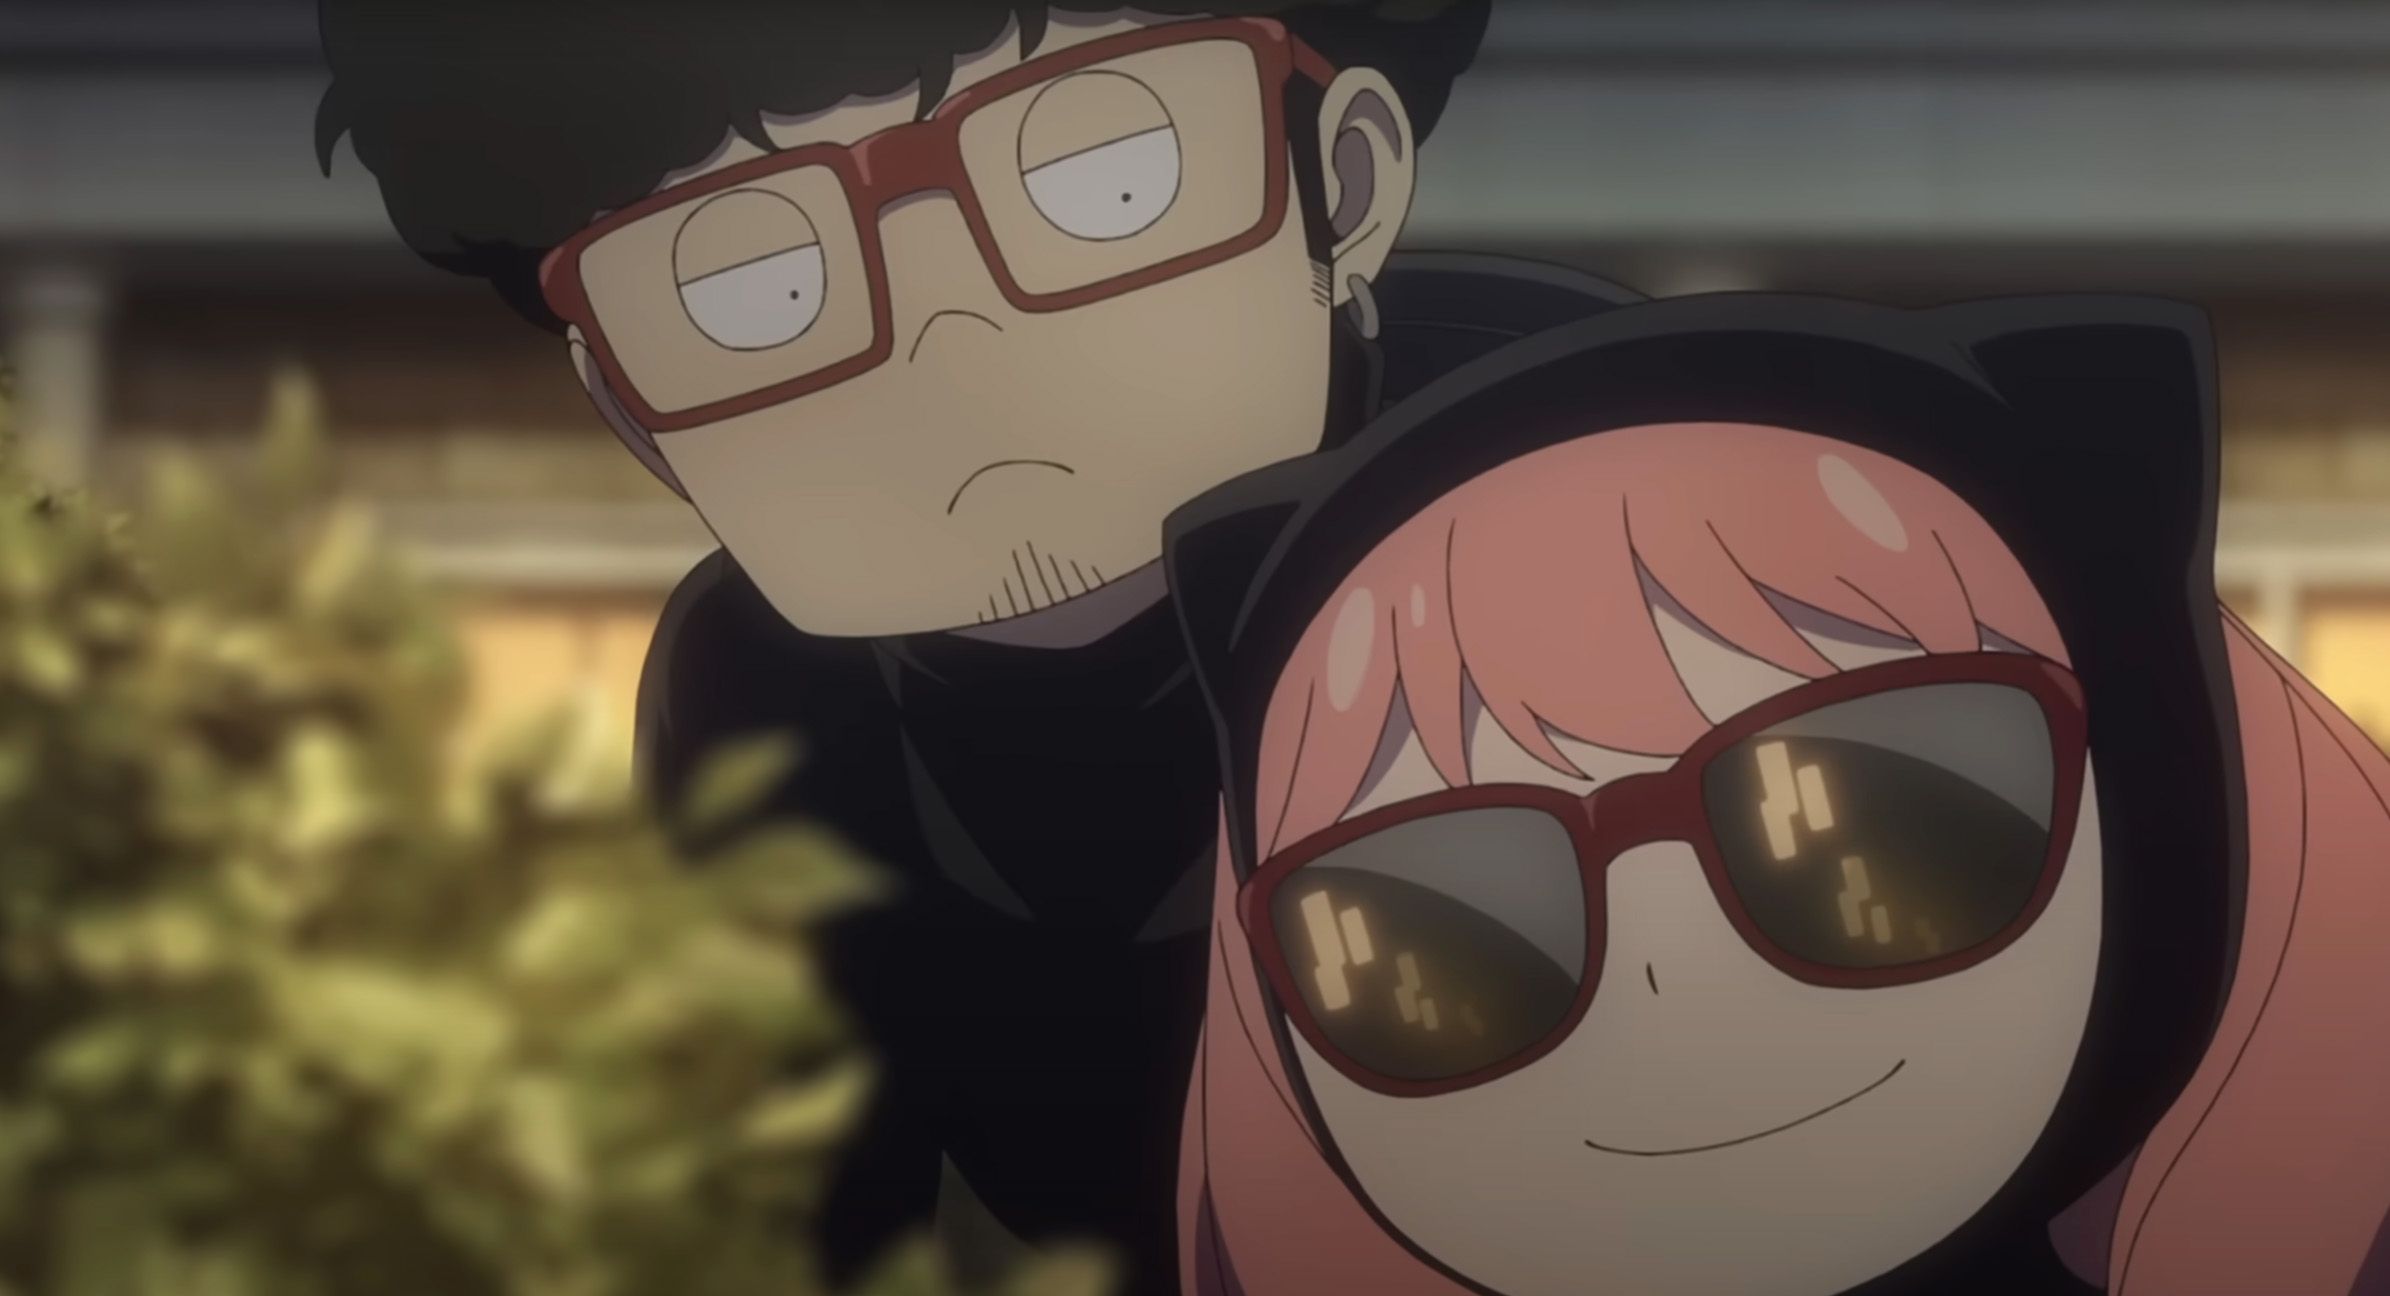 The Spy x Family season 2 opening is infectiously bubbly and